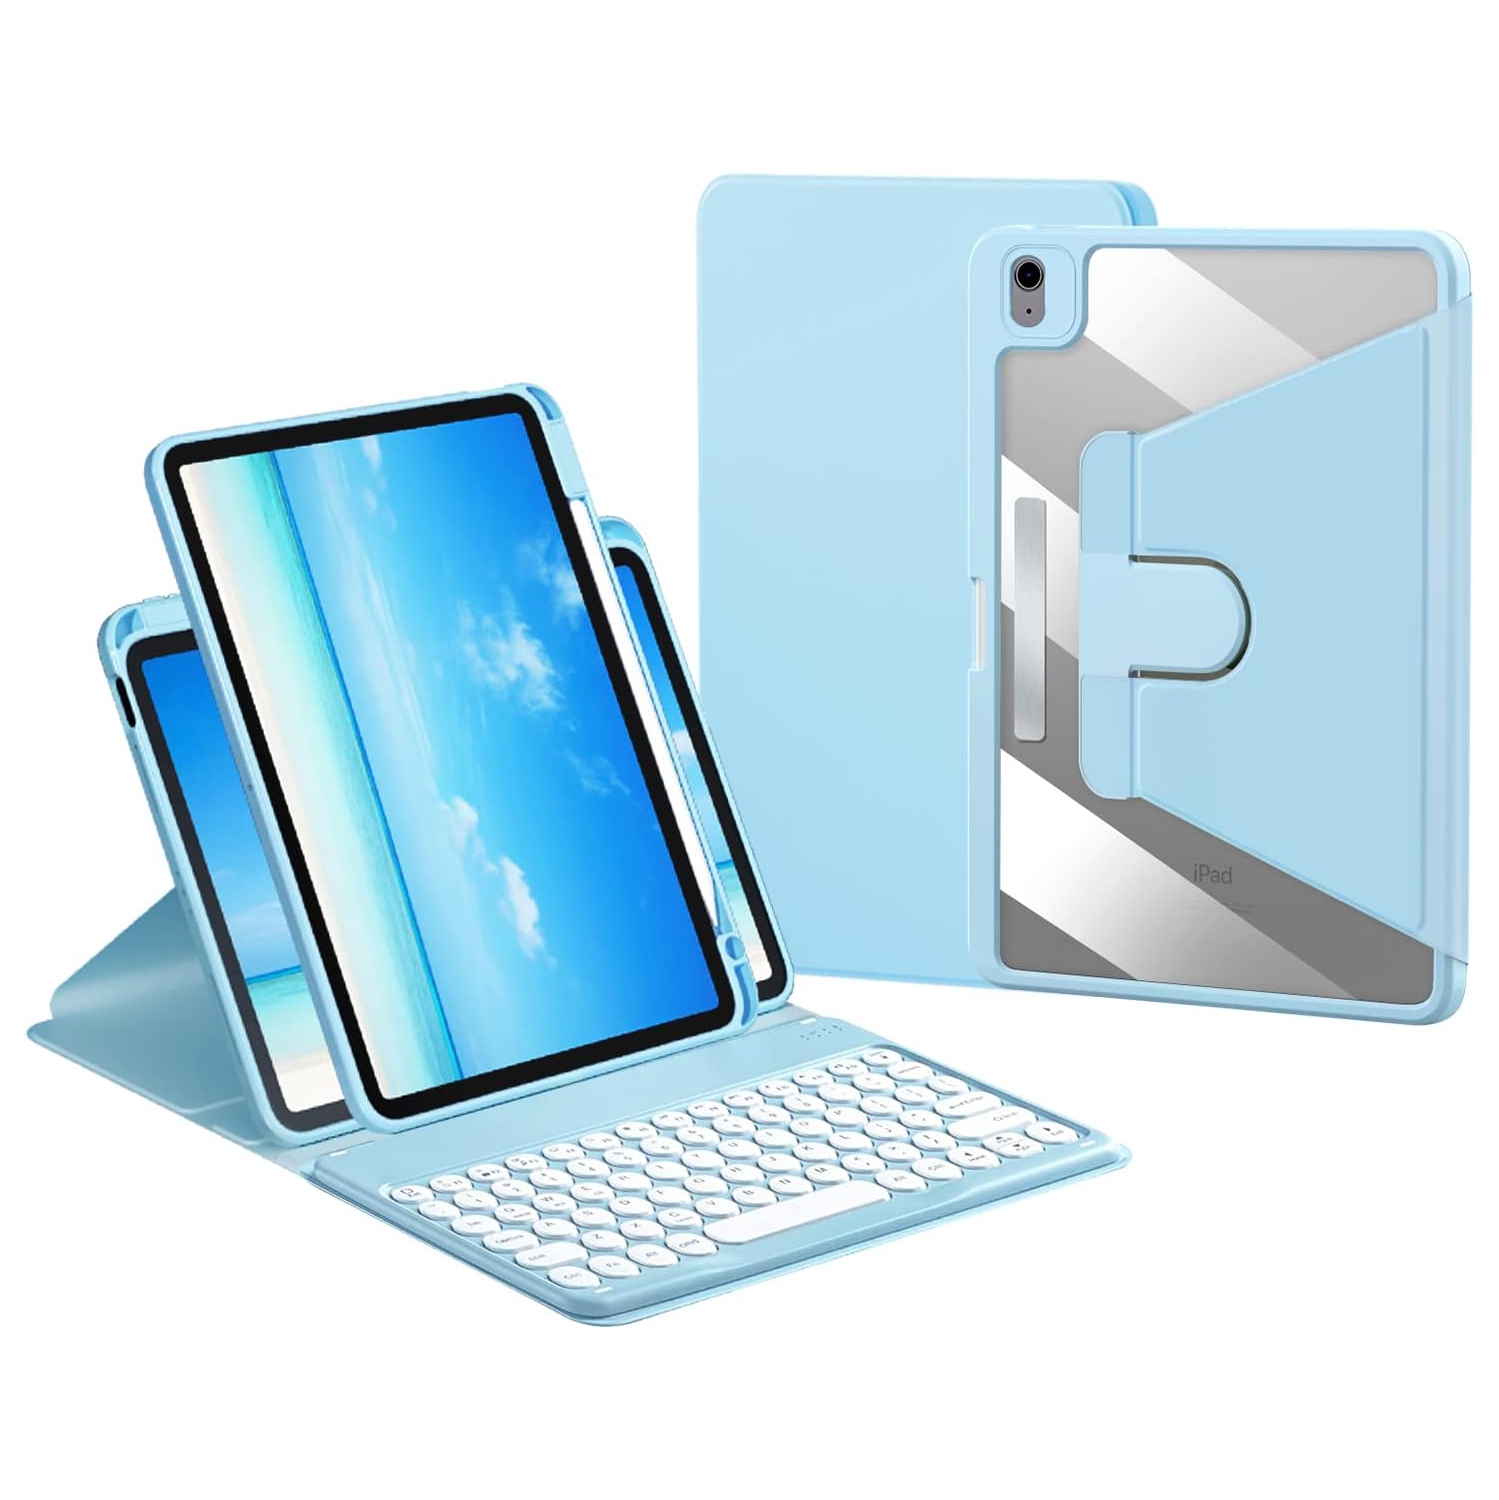 Keyboard Case for iPad Air 5th Generation 2022/Air 4th Gen 2020 10.9",iPad Pro 11 2021/2020/2018,360 Rotatable Case